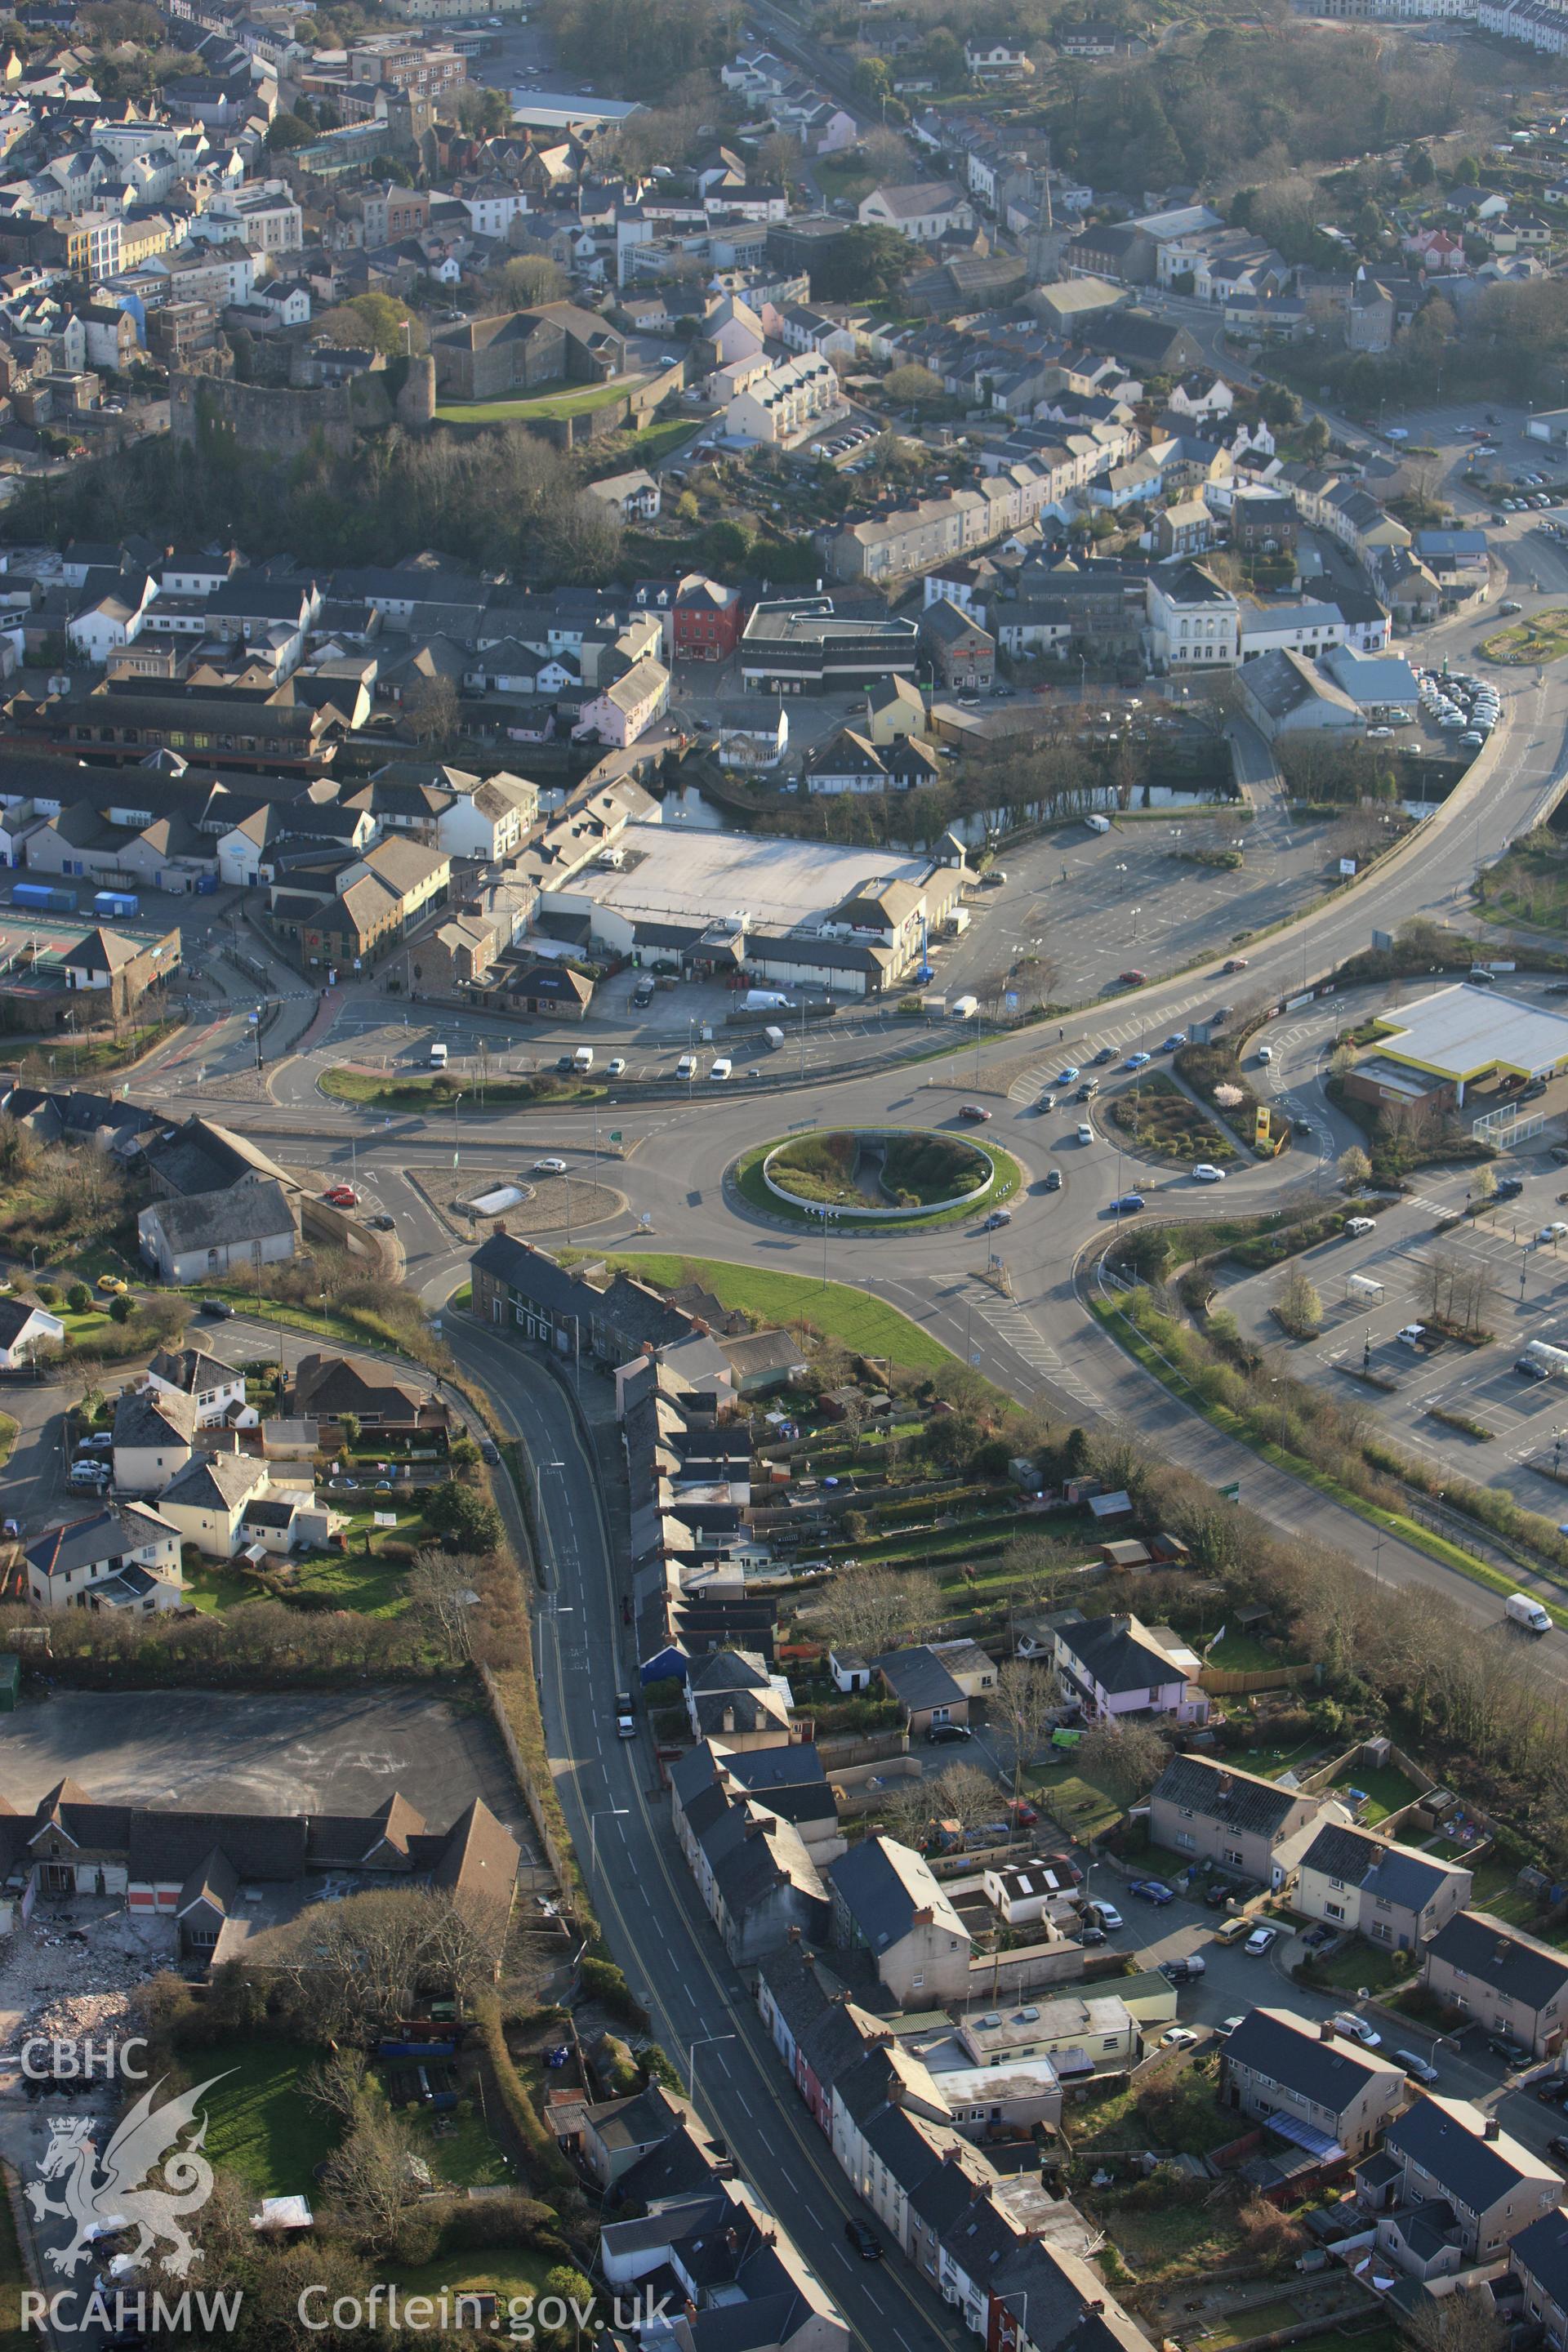 RCAHMW colour oblique aerial photograph of Haverfordwest, from the east. Taken on 13 April 2010 by Toby Driver